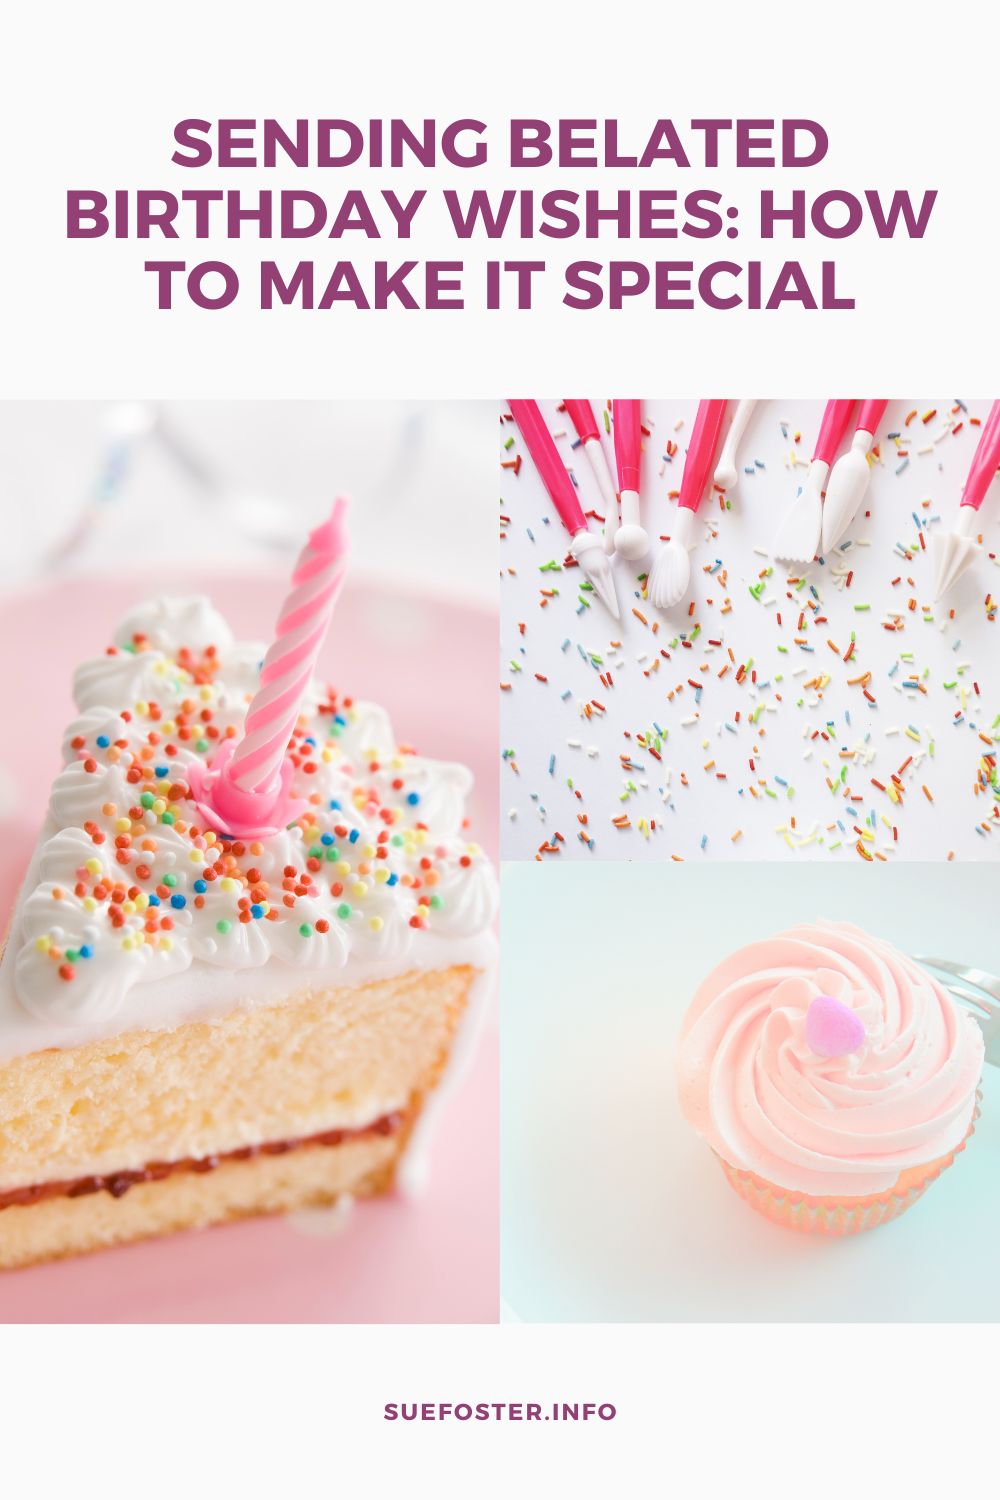 Send belated birthday wishes with warmth and sincerity. Learn creative alternatives and tips to turn delays into thoughtful gestures. Make them feel special, even if it's a bit late. 